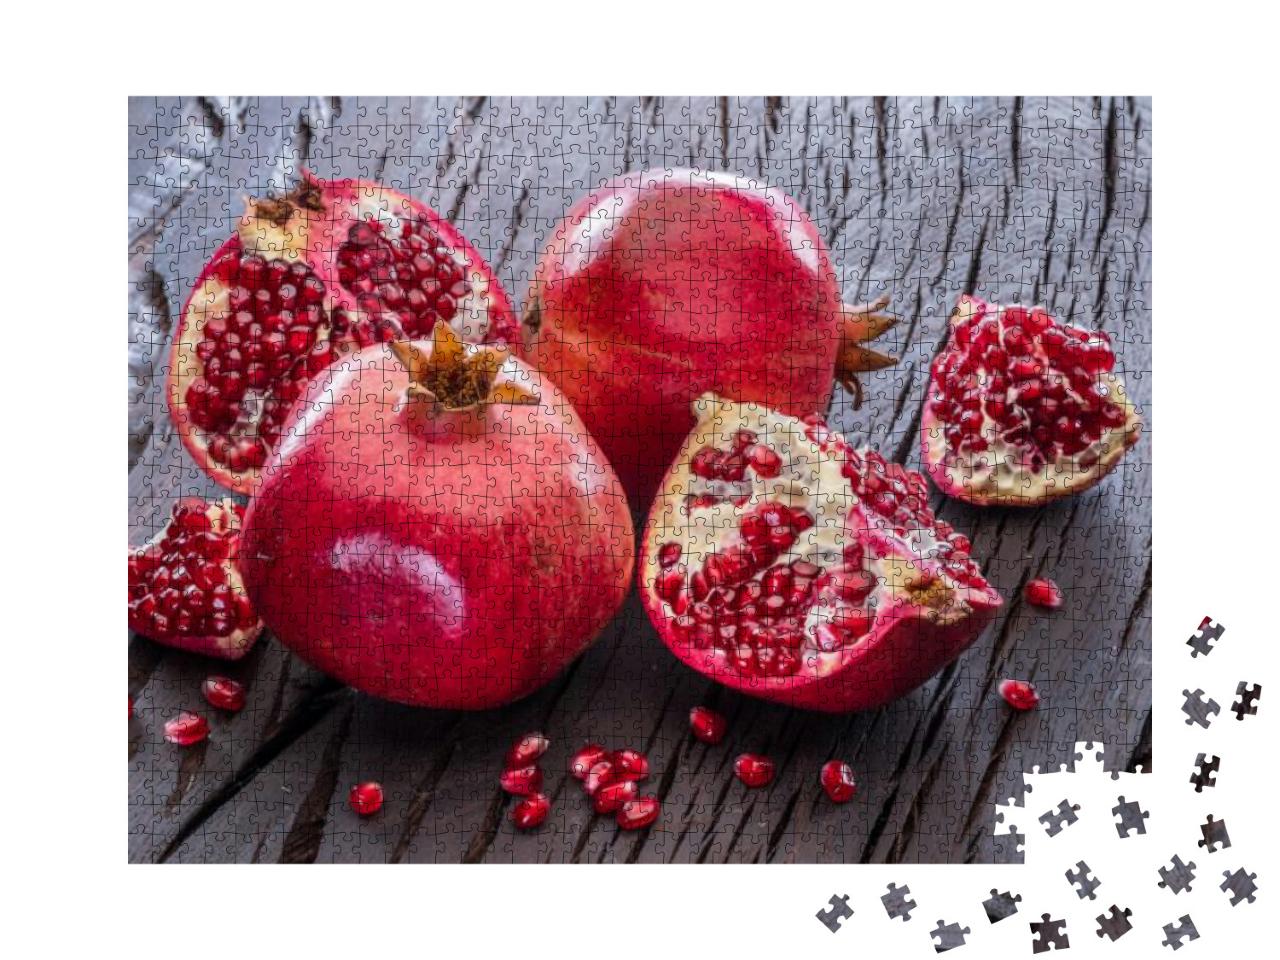 Ripe Pomegranate Fruits on the Wooden Background... Jigsaw Puzzle with 1000 pieces